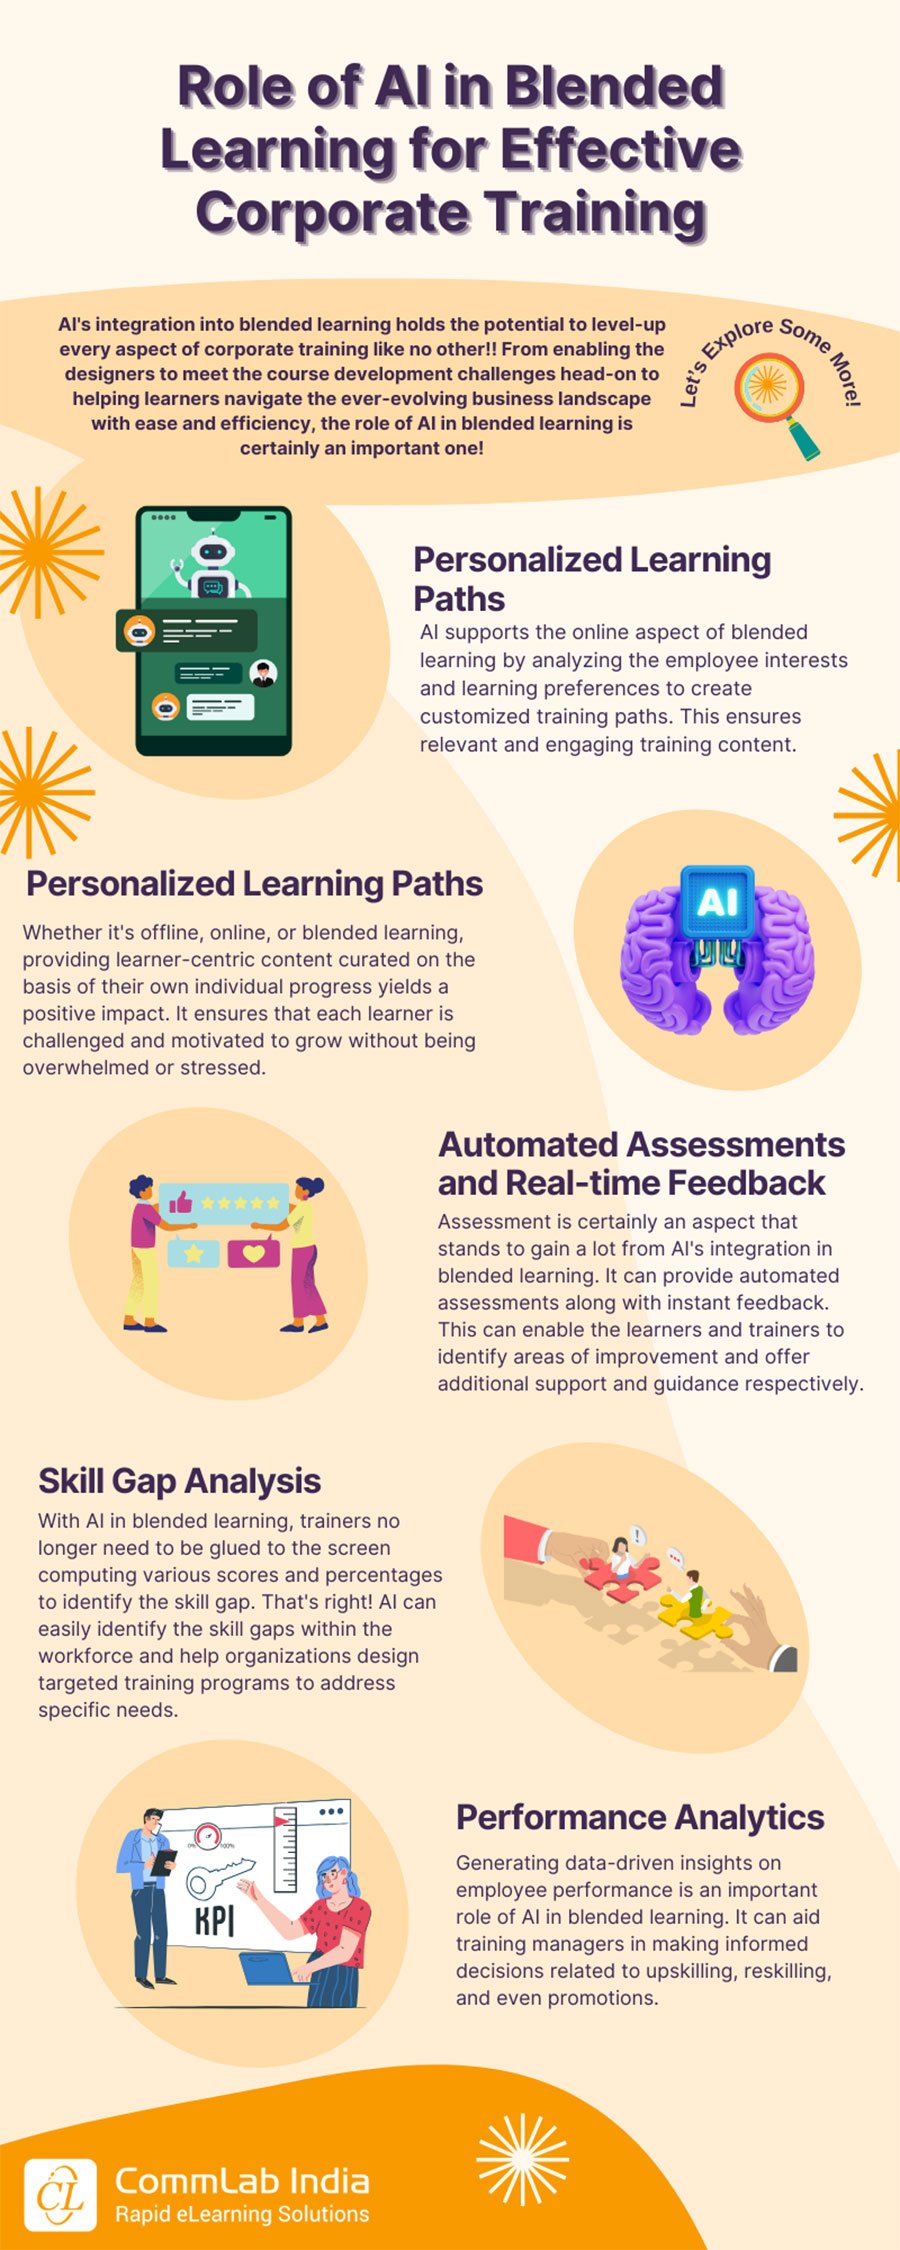 Role of AI in Blended Learning for Effective Corporate Training